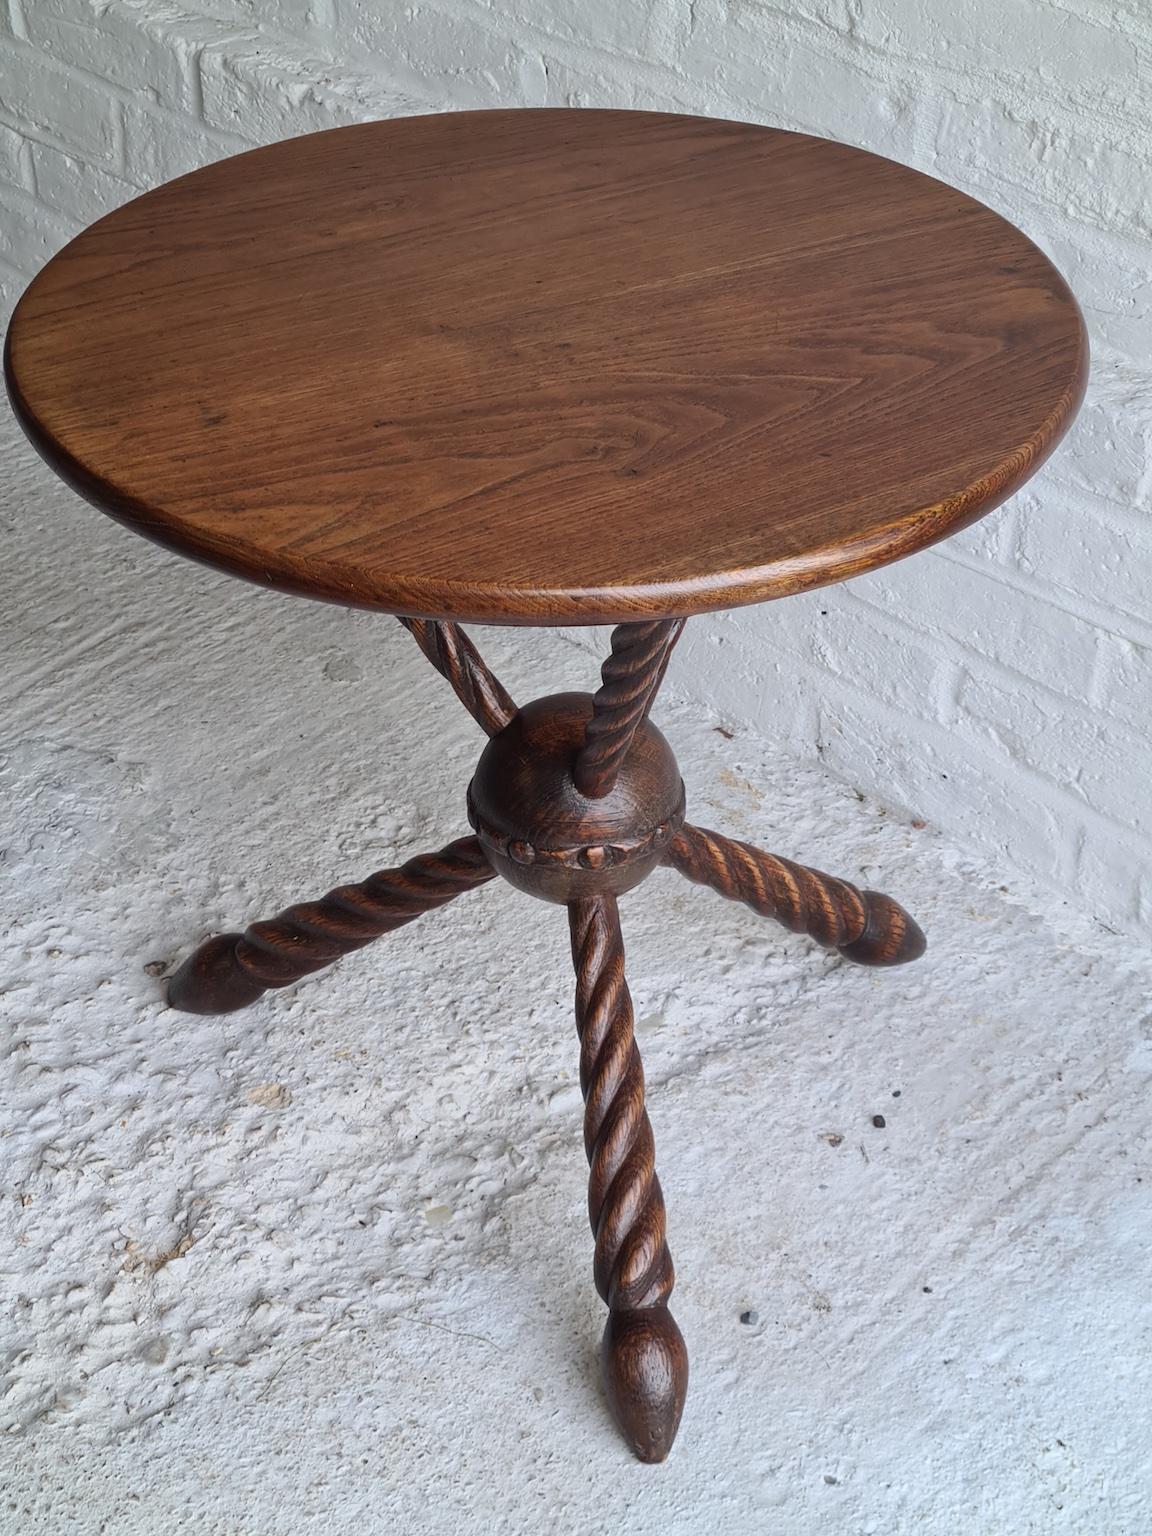 19th Century Gypsy Table, Occasional / Side Table, Tripod Legs, circa 1860-1870 For Sale 1